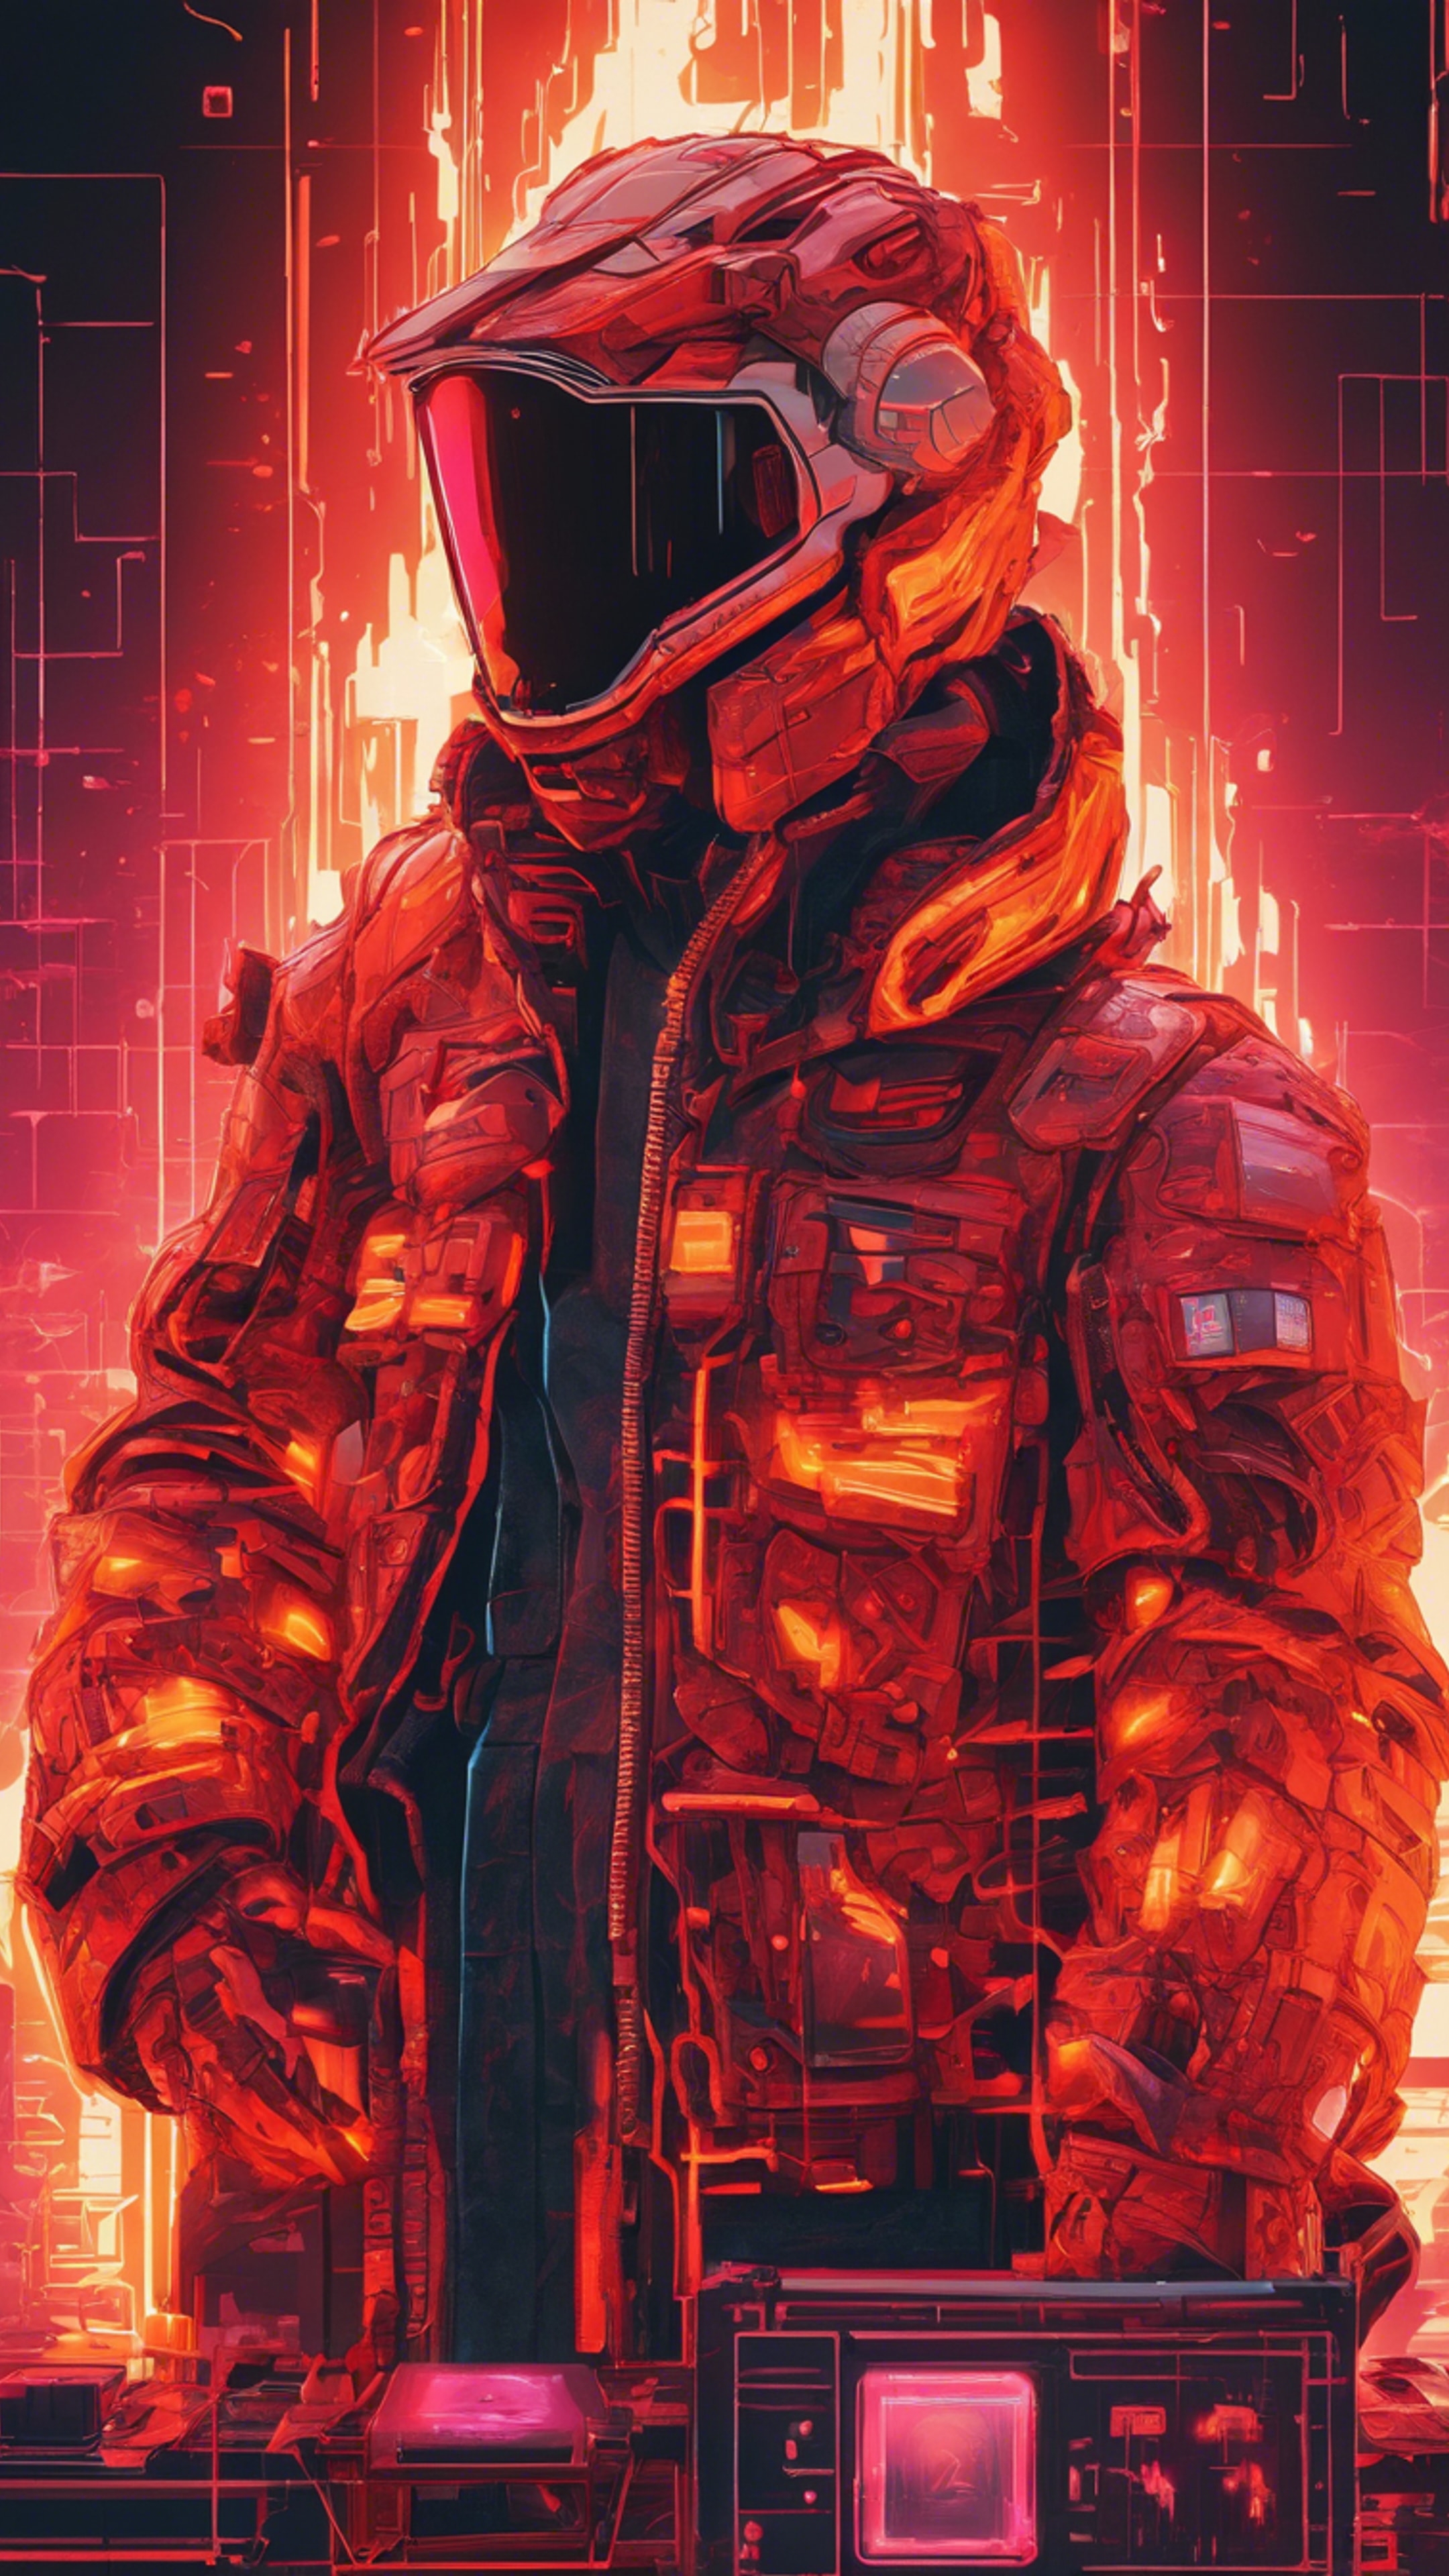 A stunning artwork of red and orange pixelated fire representing the fierce passion of gaming. Tapeta na zeď[8d5607d360bb44738828]